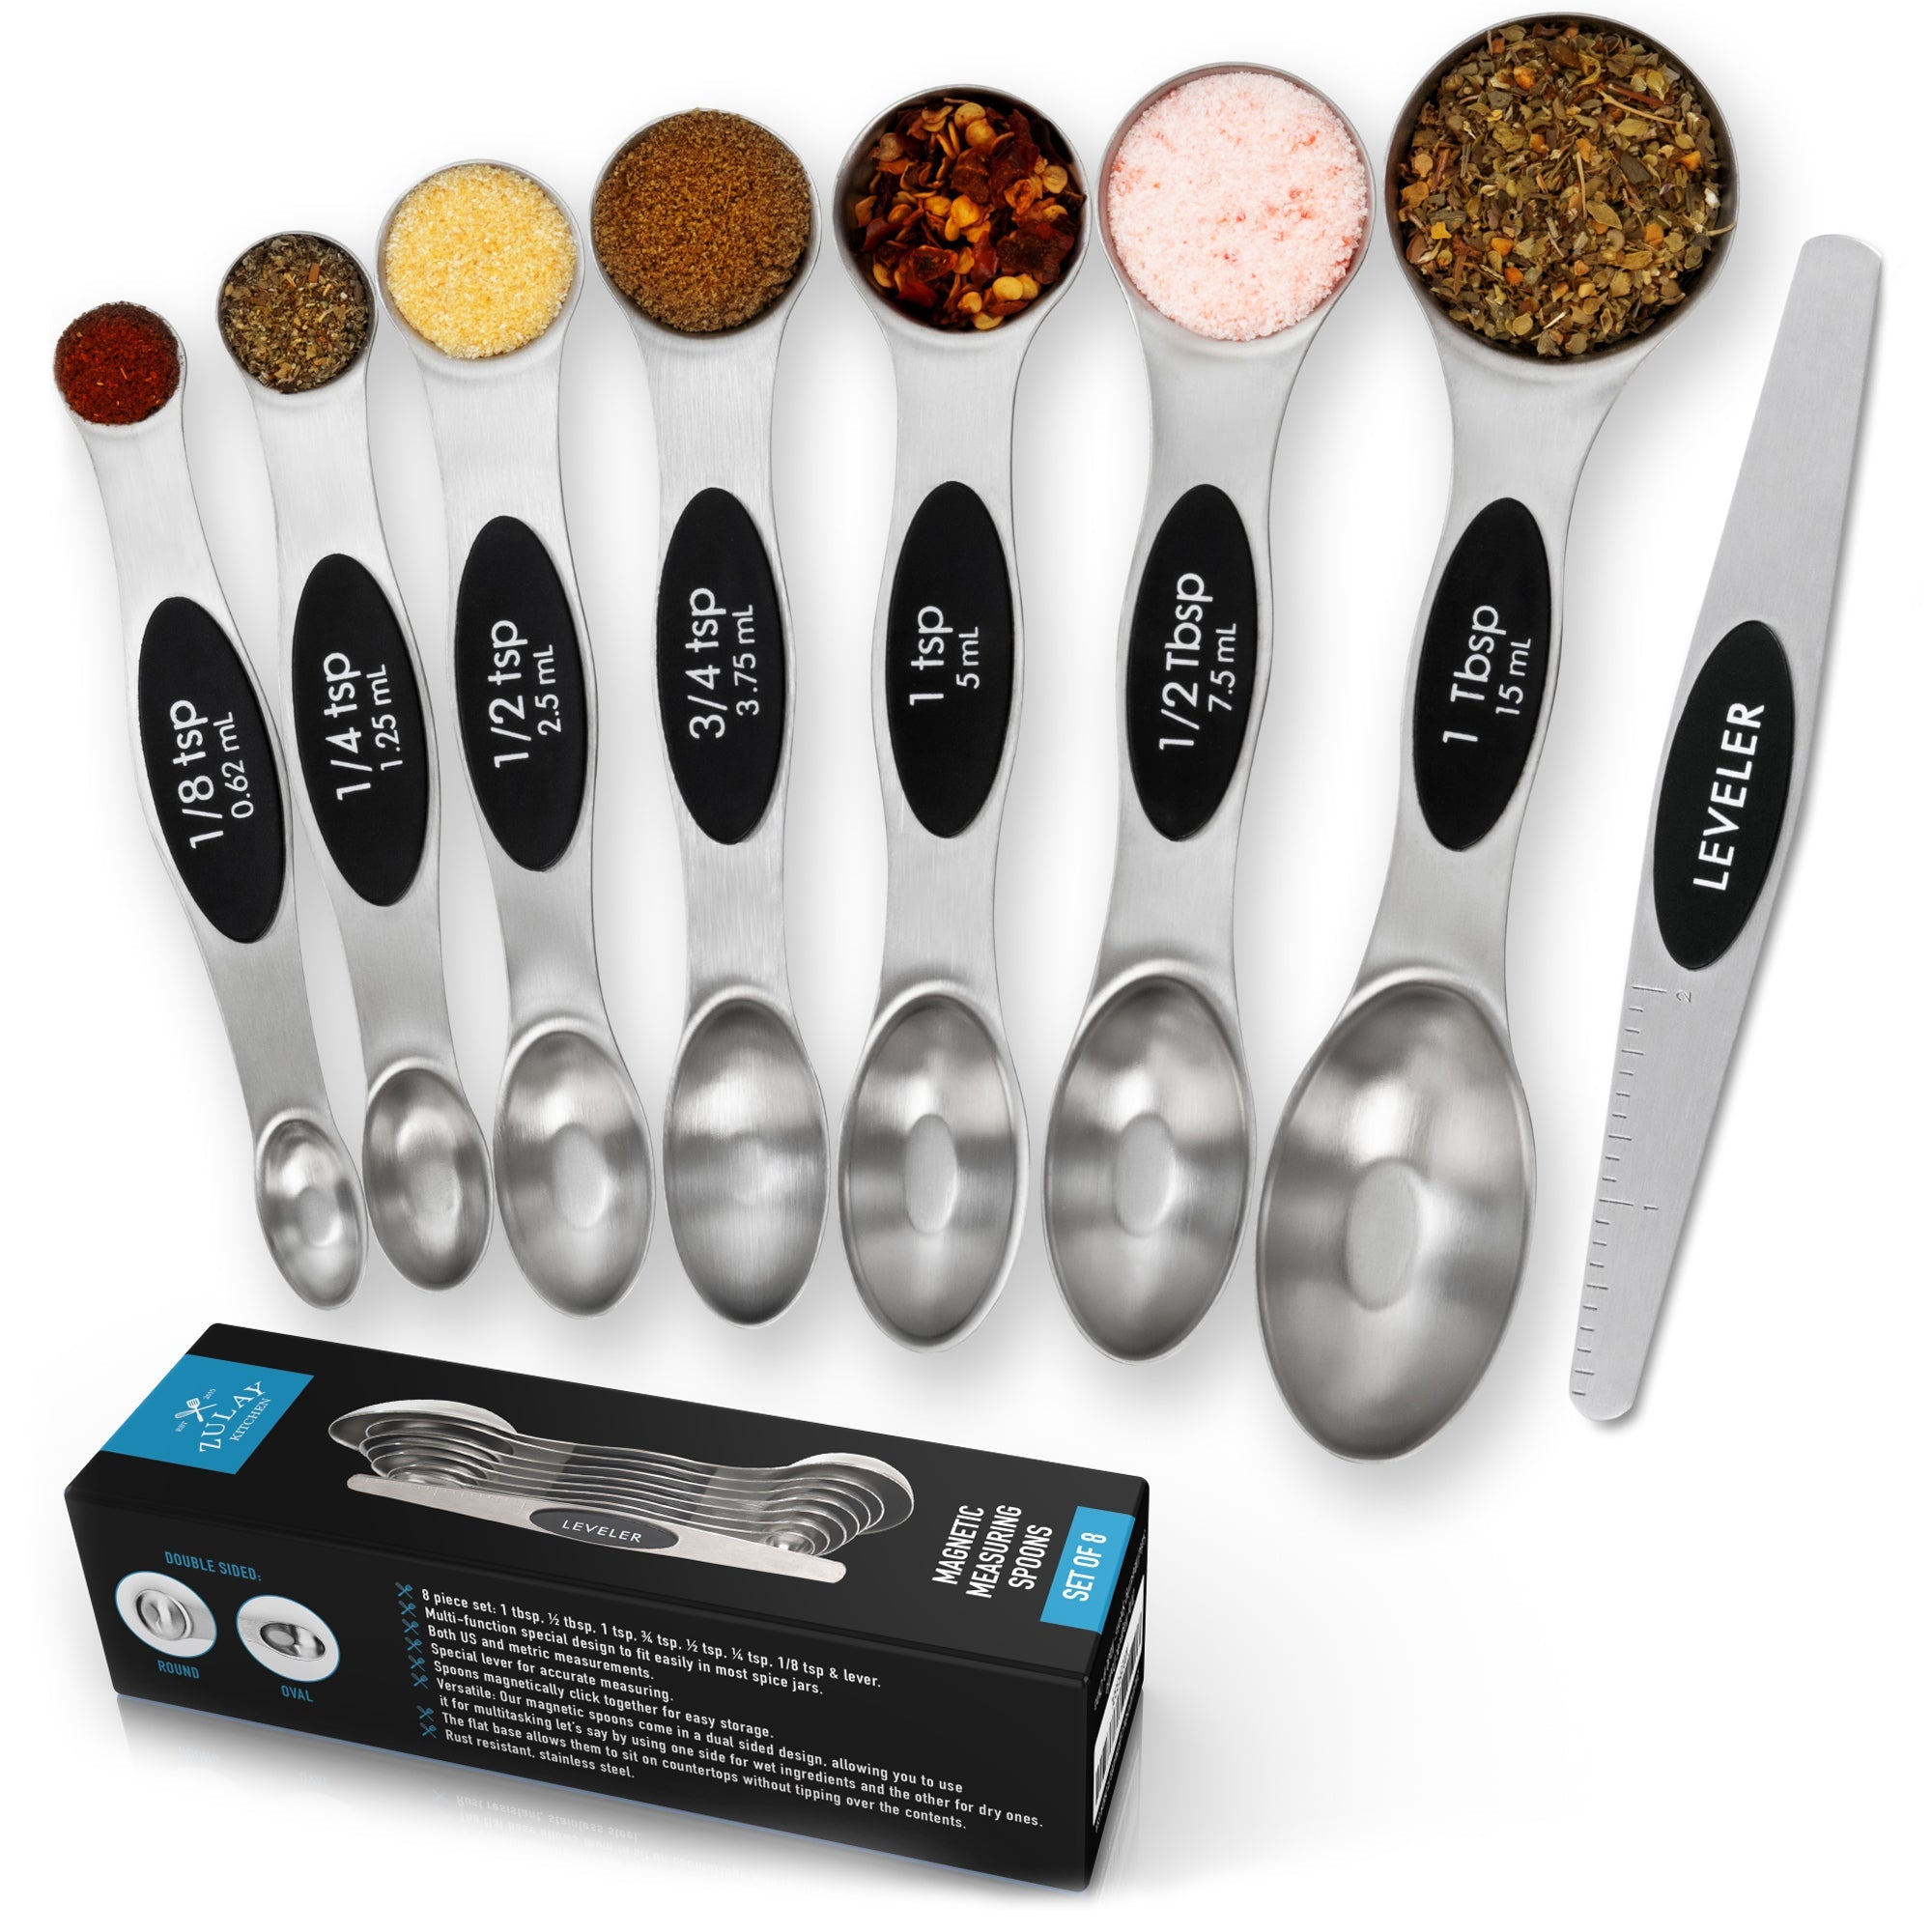 https://cdn.shopify.com/s/files/1/0091/0593/2324/products/magnetic-measuring-spoons-with-levelermagnetic-measuring-spoons-with-levelerzulay-kitchen-clearwaterzulay-kitchenz-mgntc-2side-msrng-spn-934063.jpg?v=1684848514&width=2000